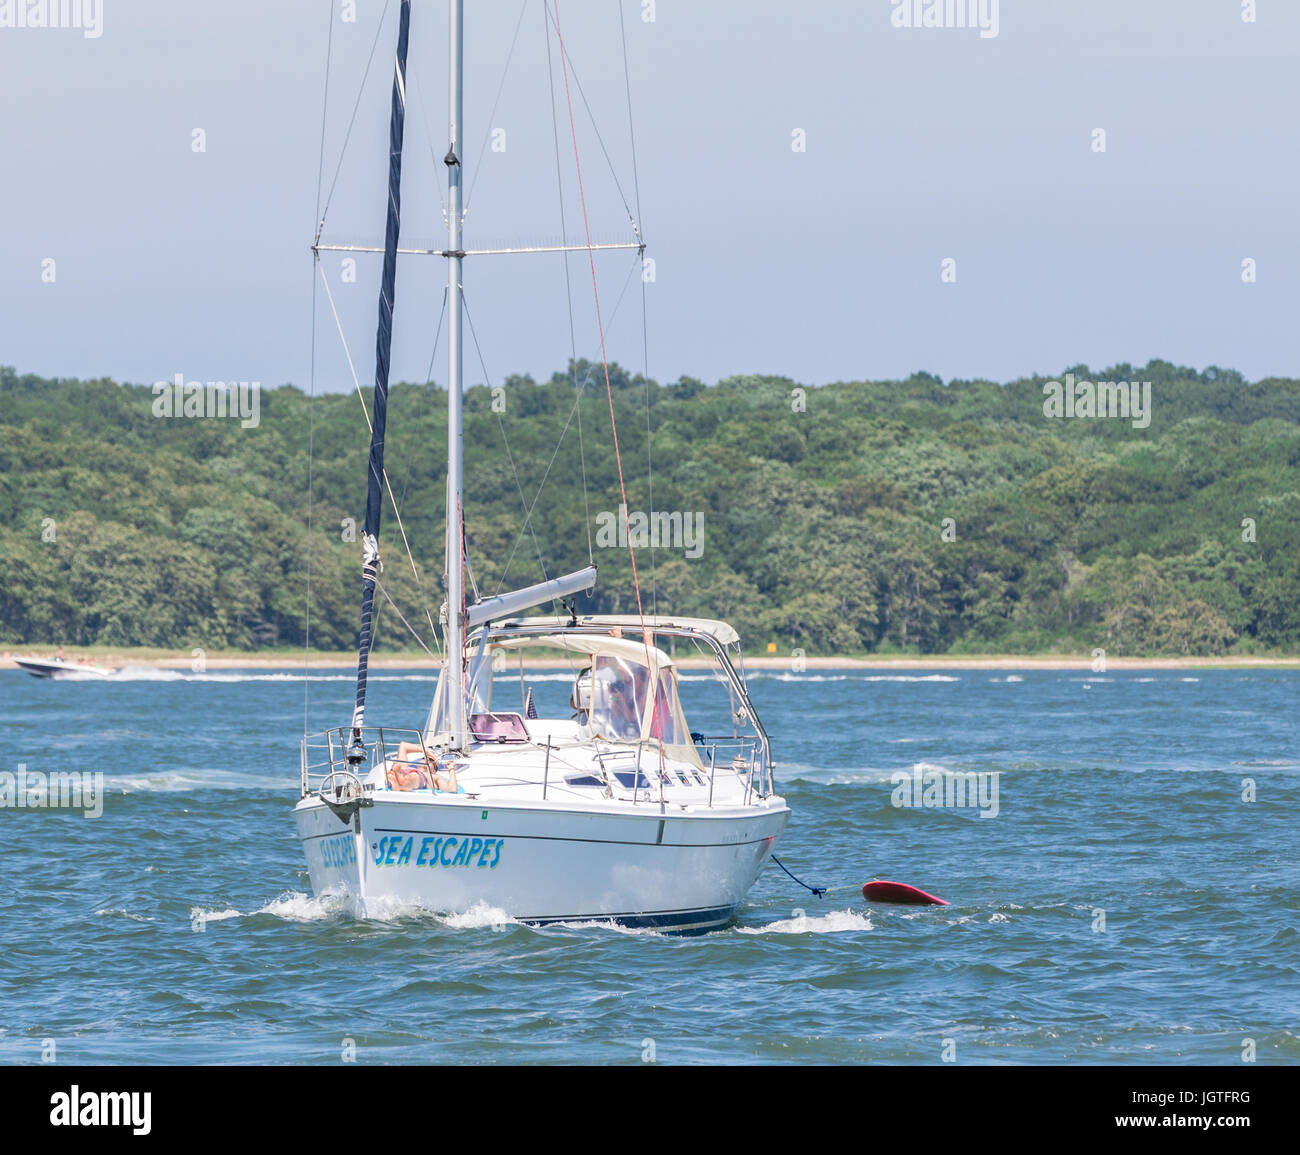 sail boat off shelter island with sails down Stock Photo